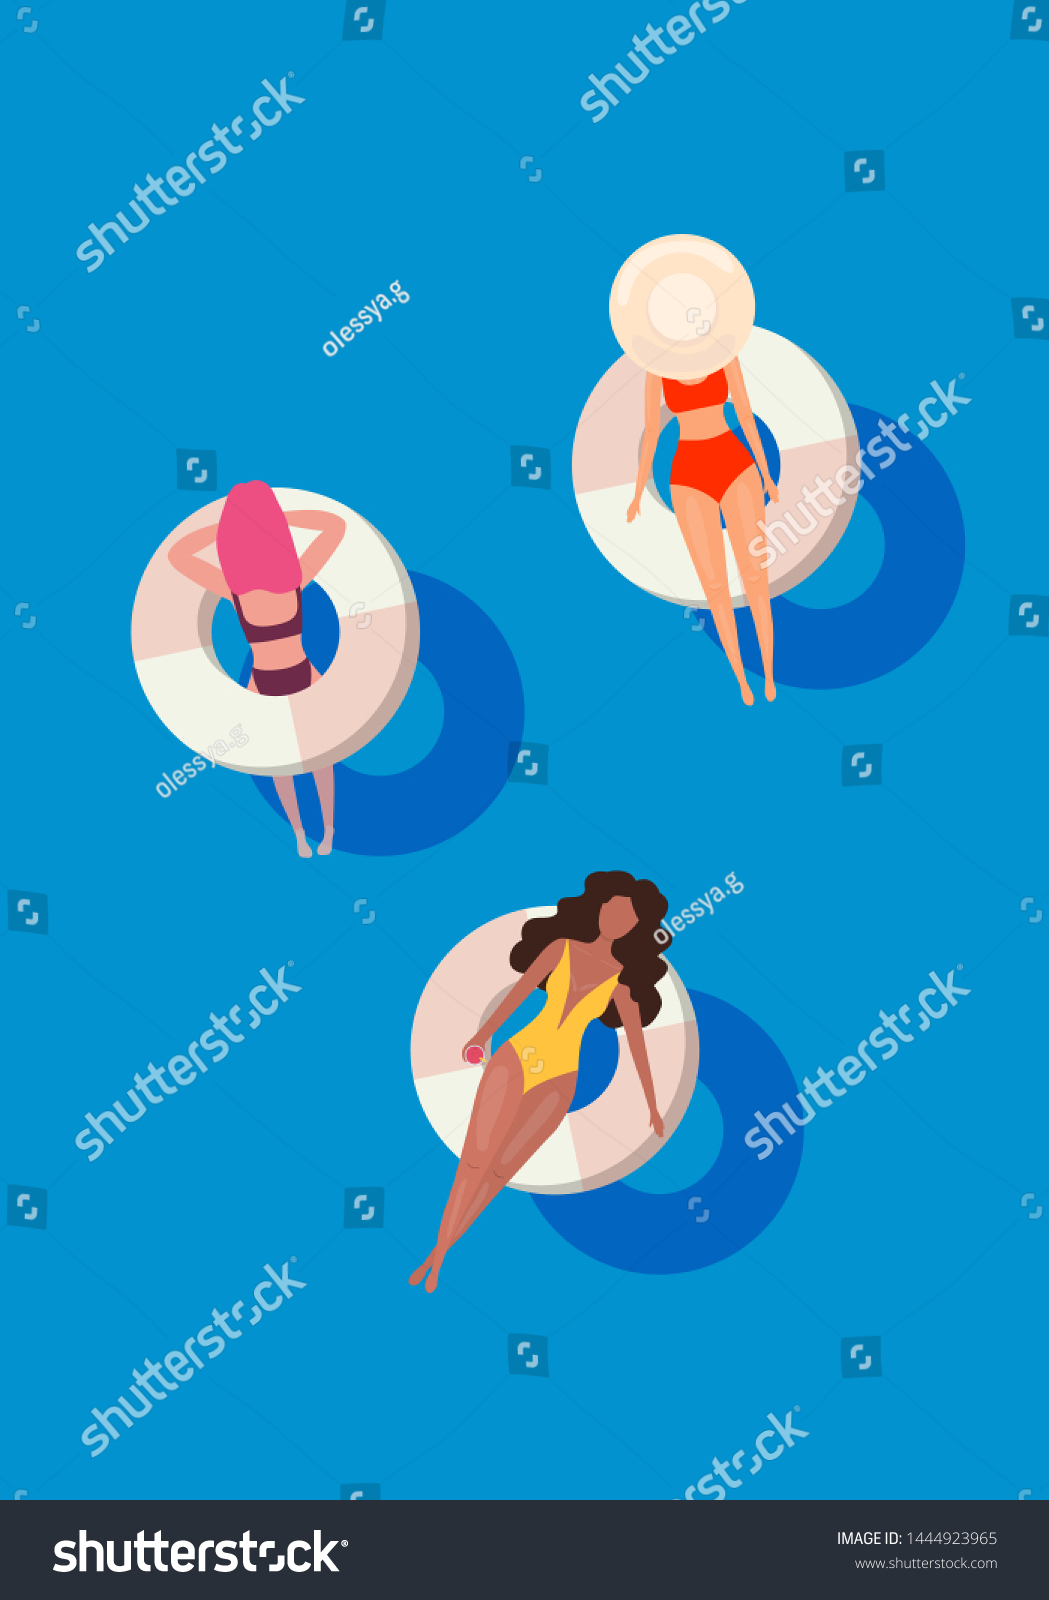 Women in swim suits lying on floating swimming pool mattresses. Summer pool party invitation design. Flyer or banner template. Flat design elements, minimalist style. Vector illustration. #1444923965